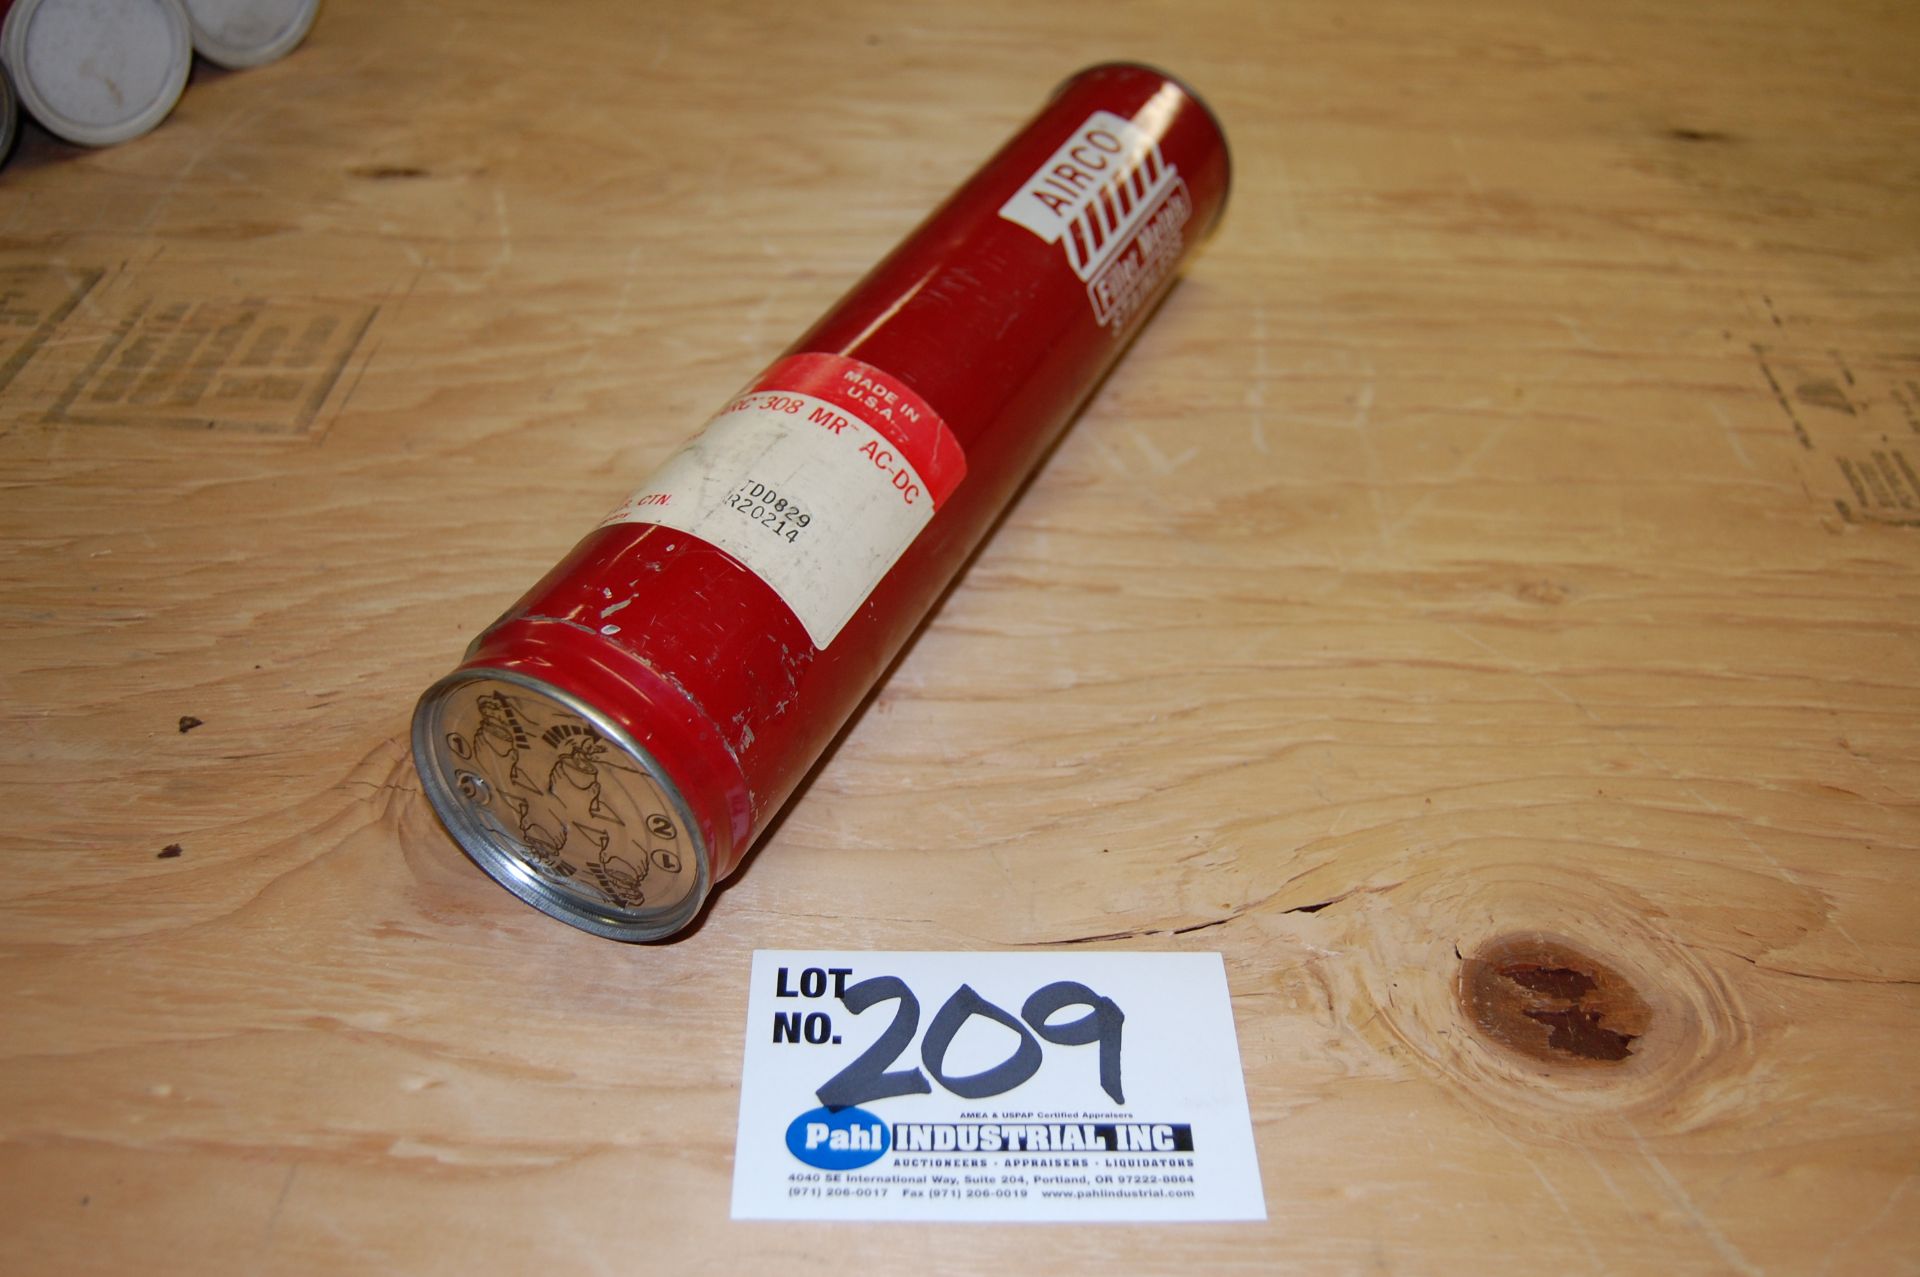 Airco Code-Arc 308 MR AC/DC Stainless Steel Electrodes Unopened